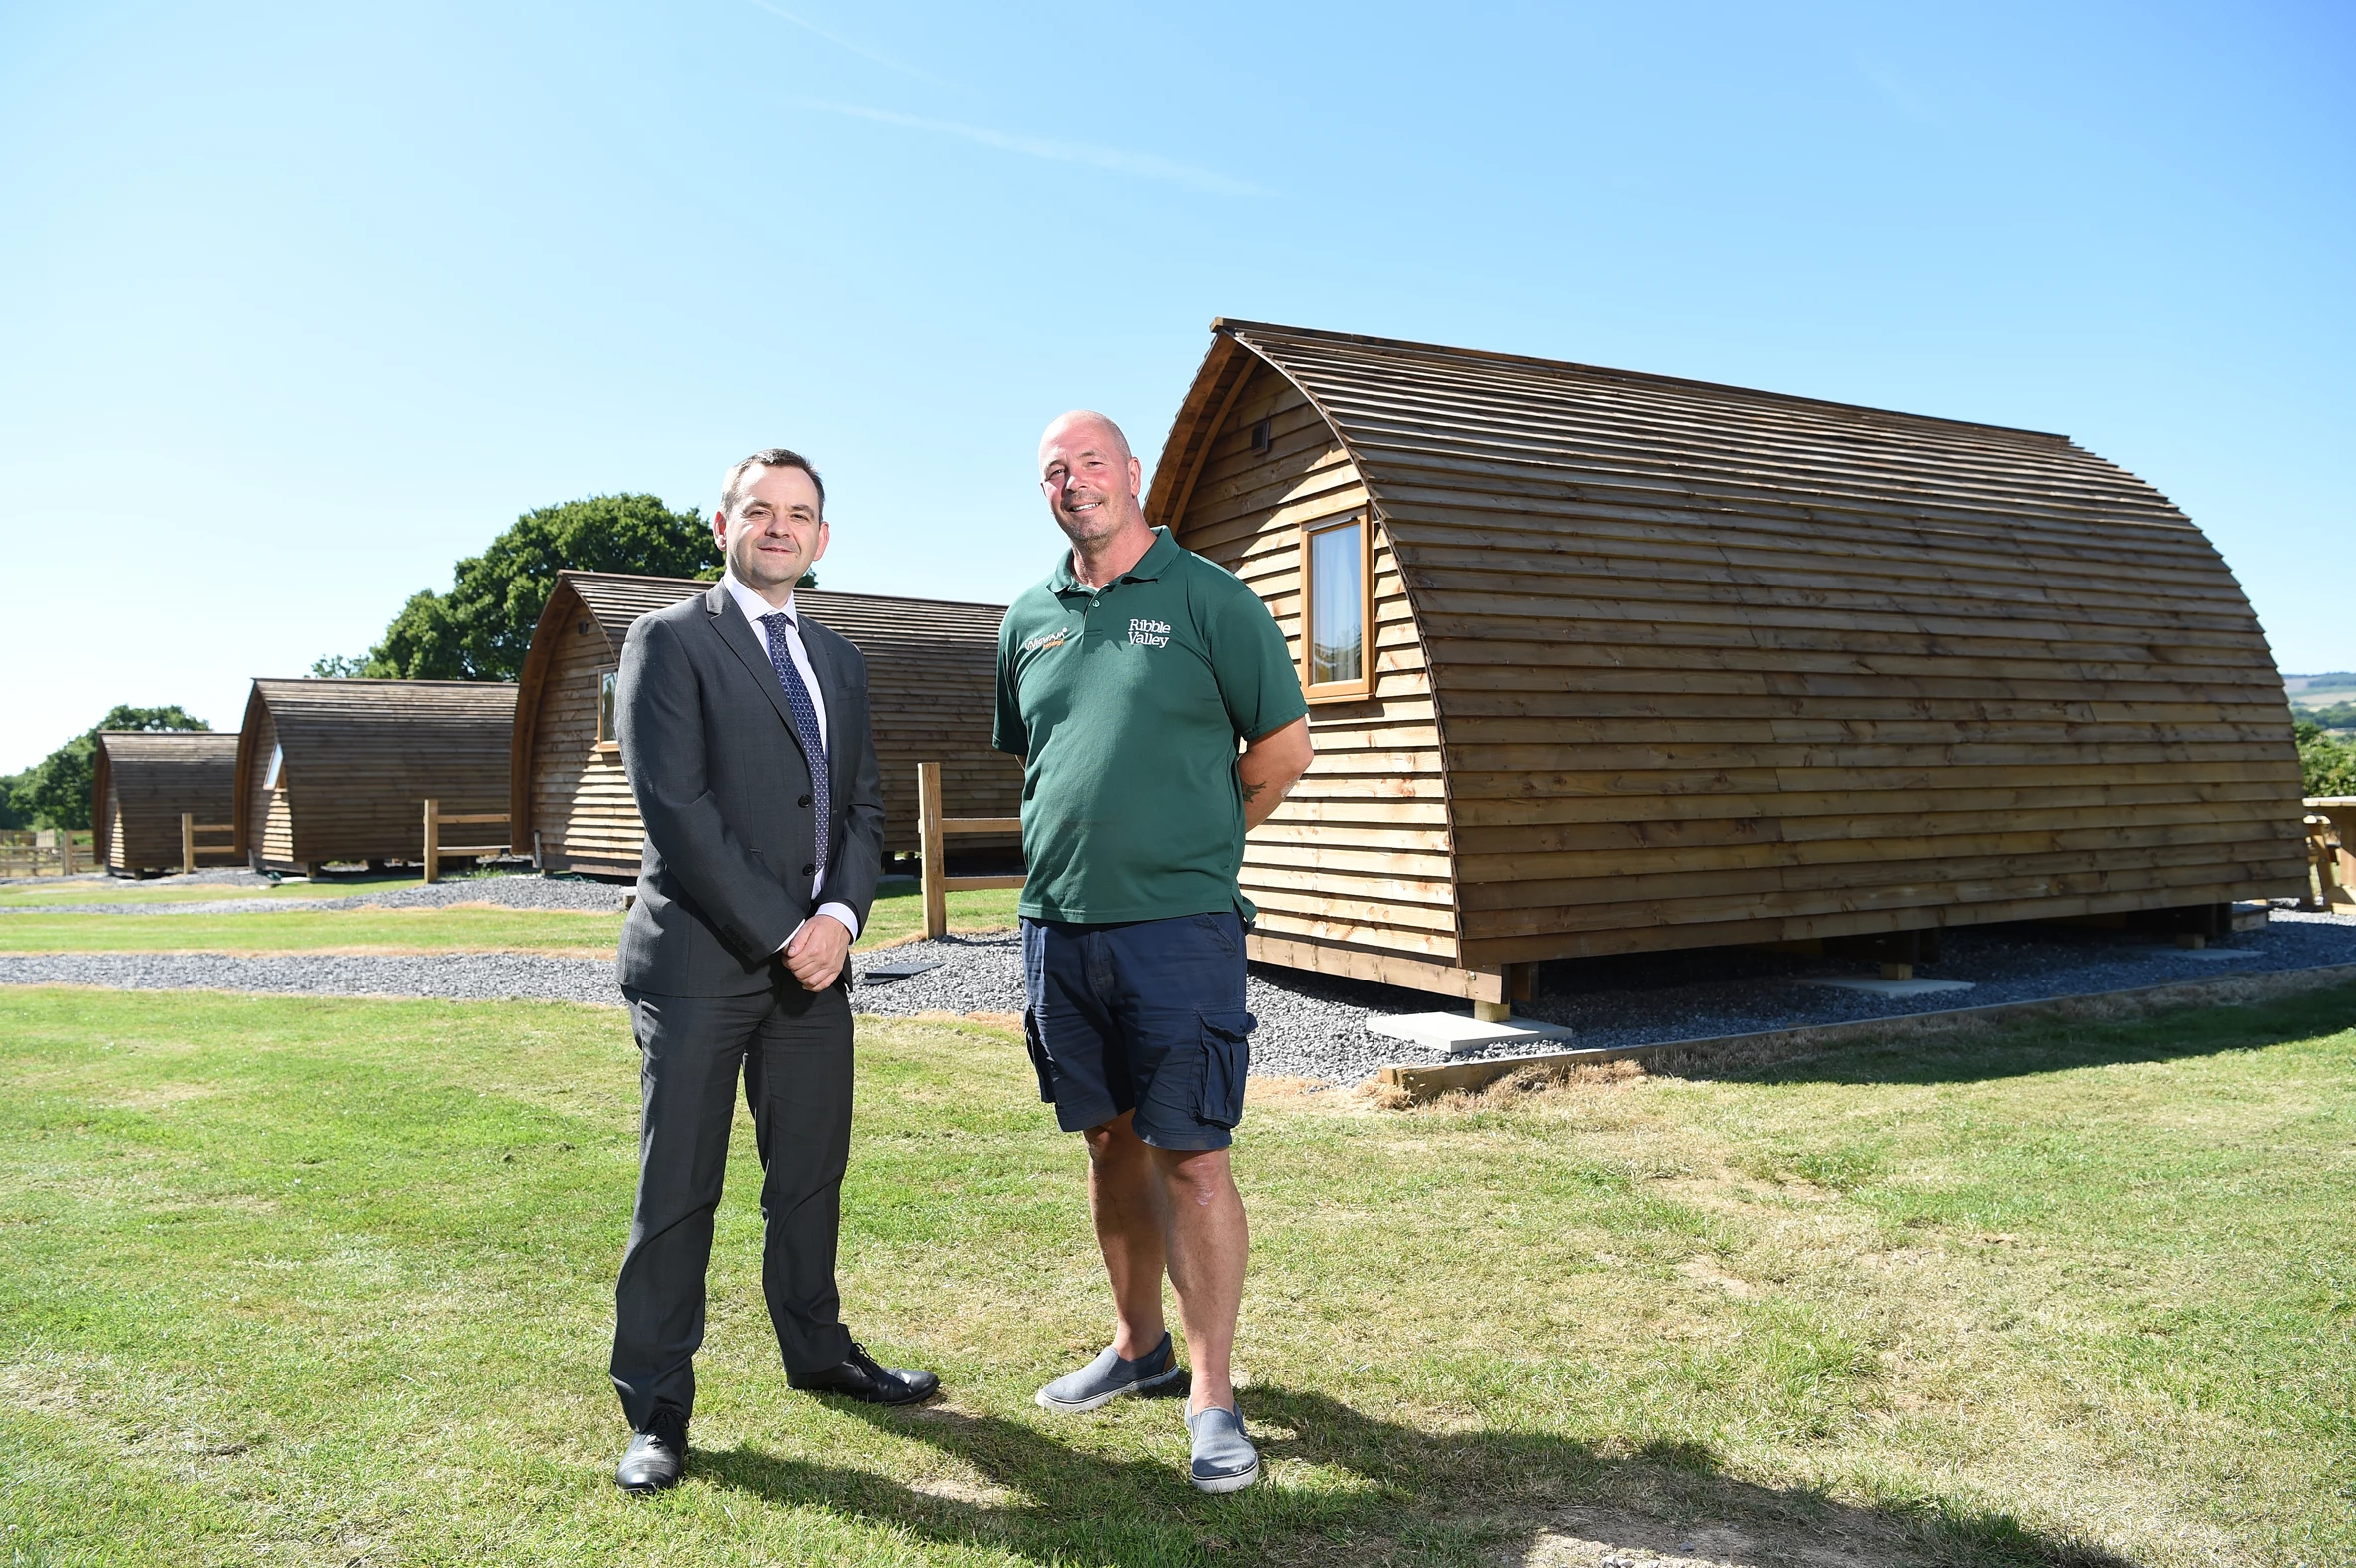 Pierce associate director Mark Walmsley and Ribble Valley Glamping director Martyn McDonnell 